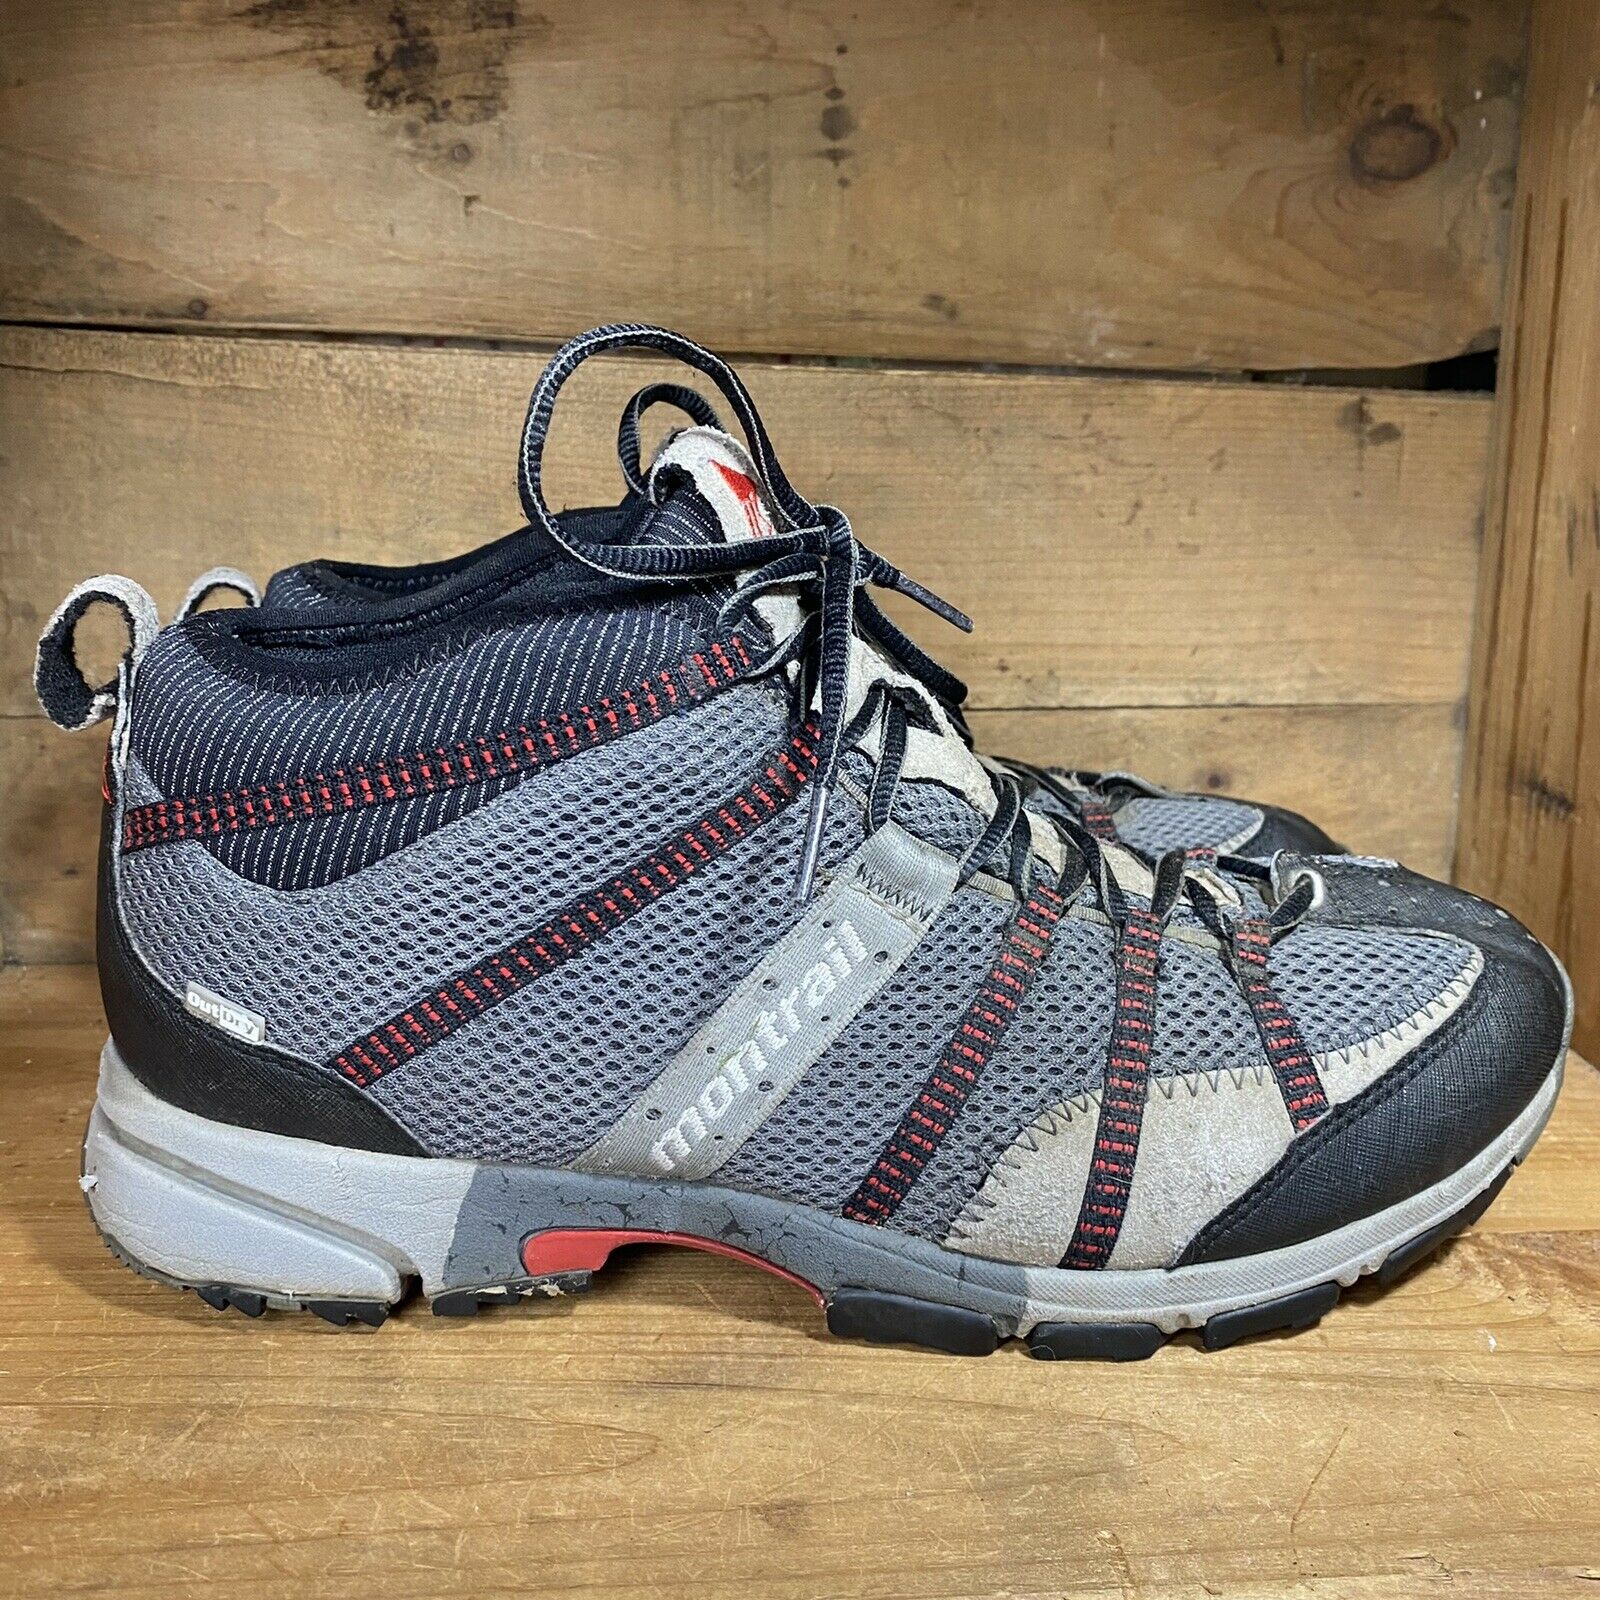 Montrail Men’s Outdry Gryptonite Trail Shield Hiking Boots Size 11 GM2133-063